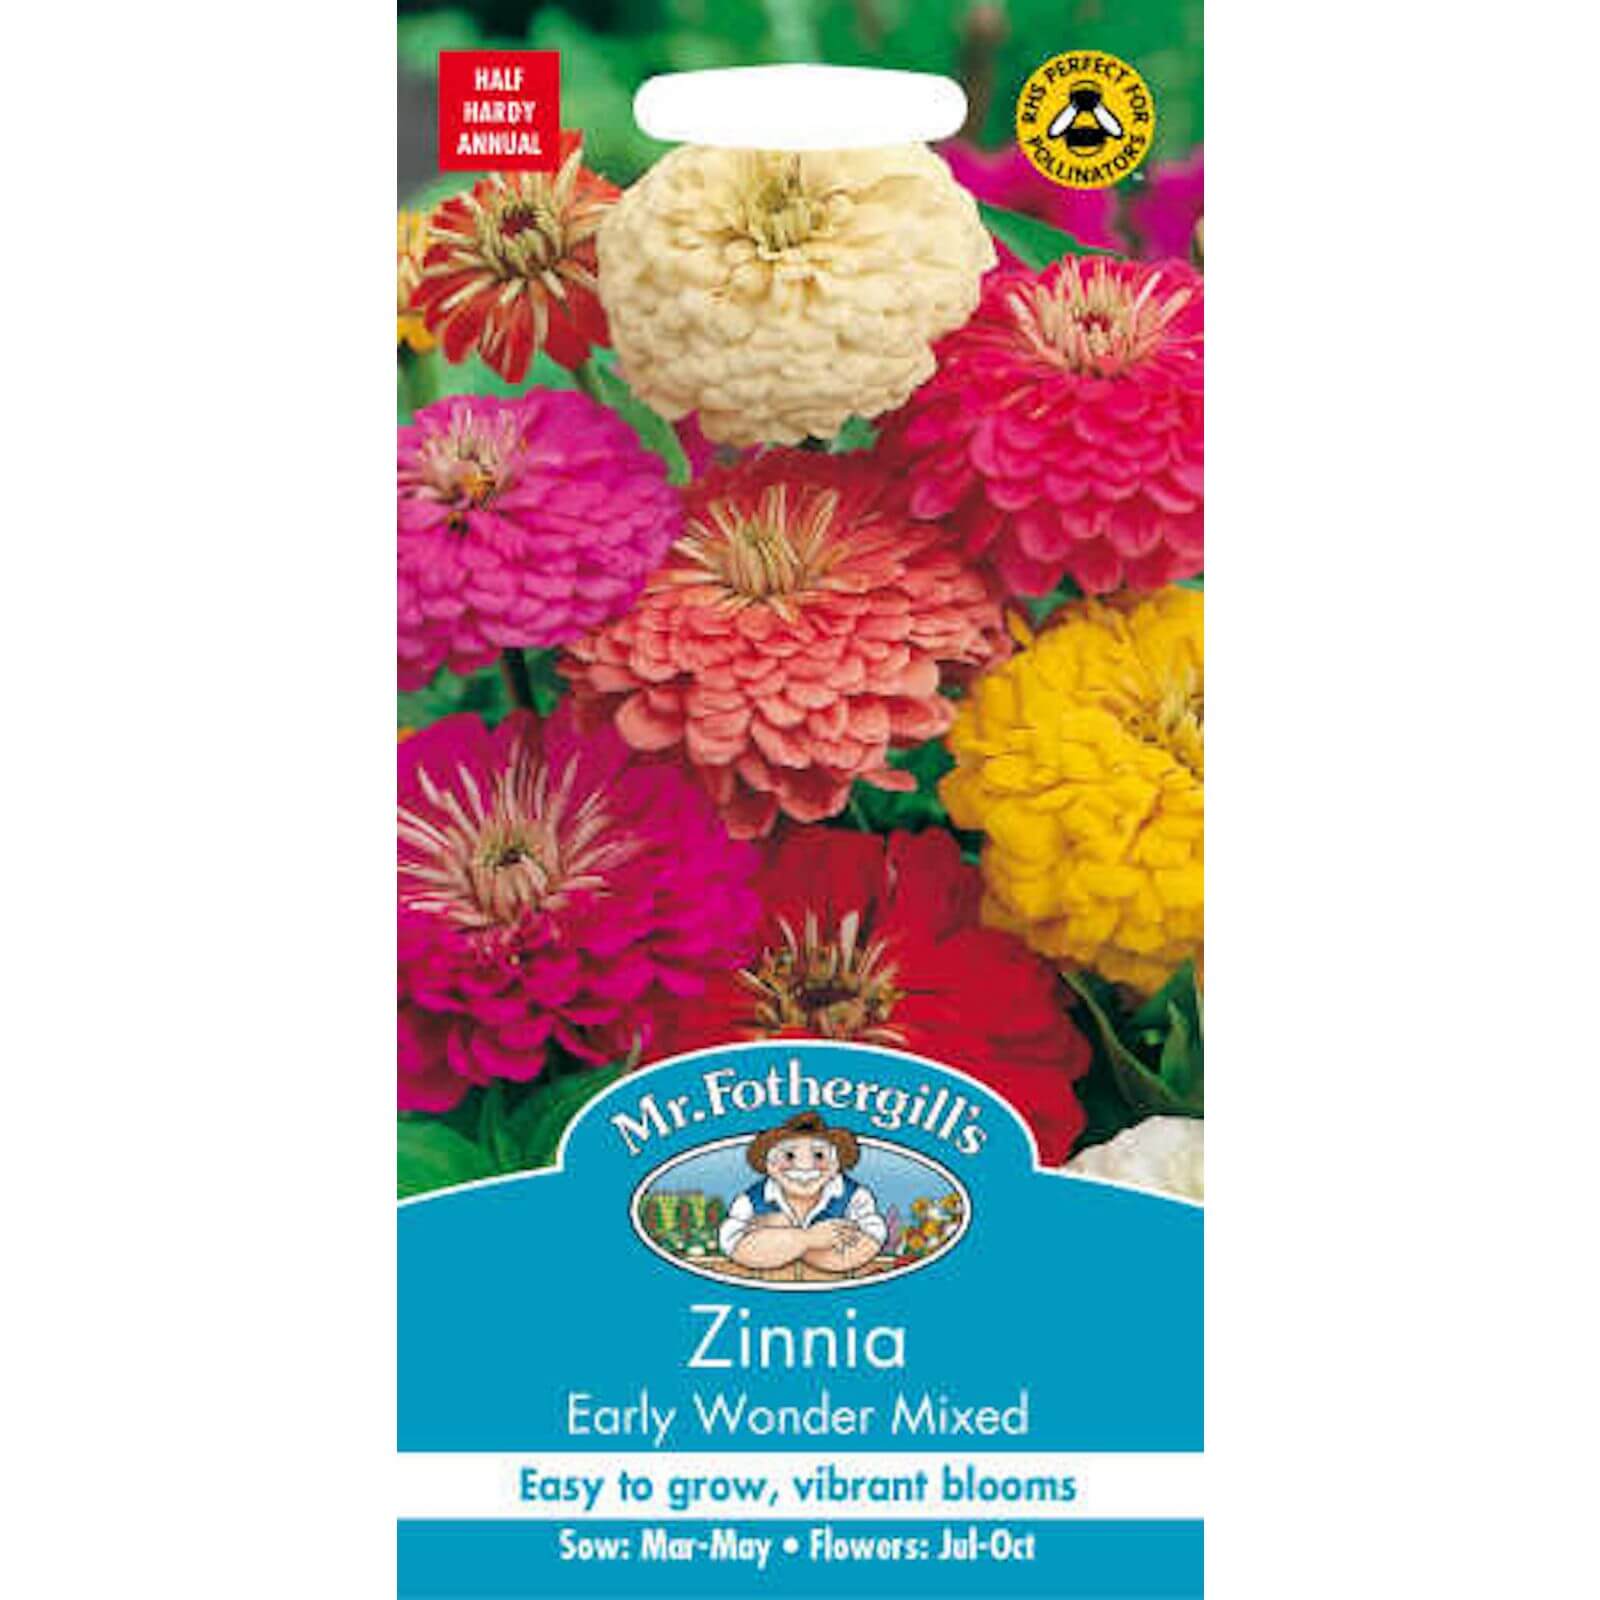 Mr. Fothergill's Zinnia Early Wonder Mixed Seeds